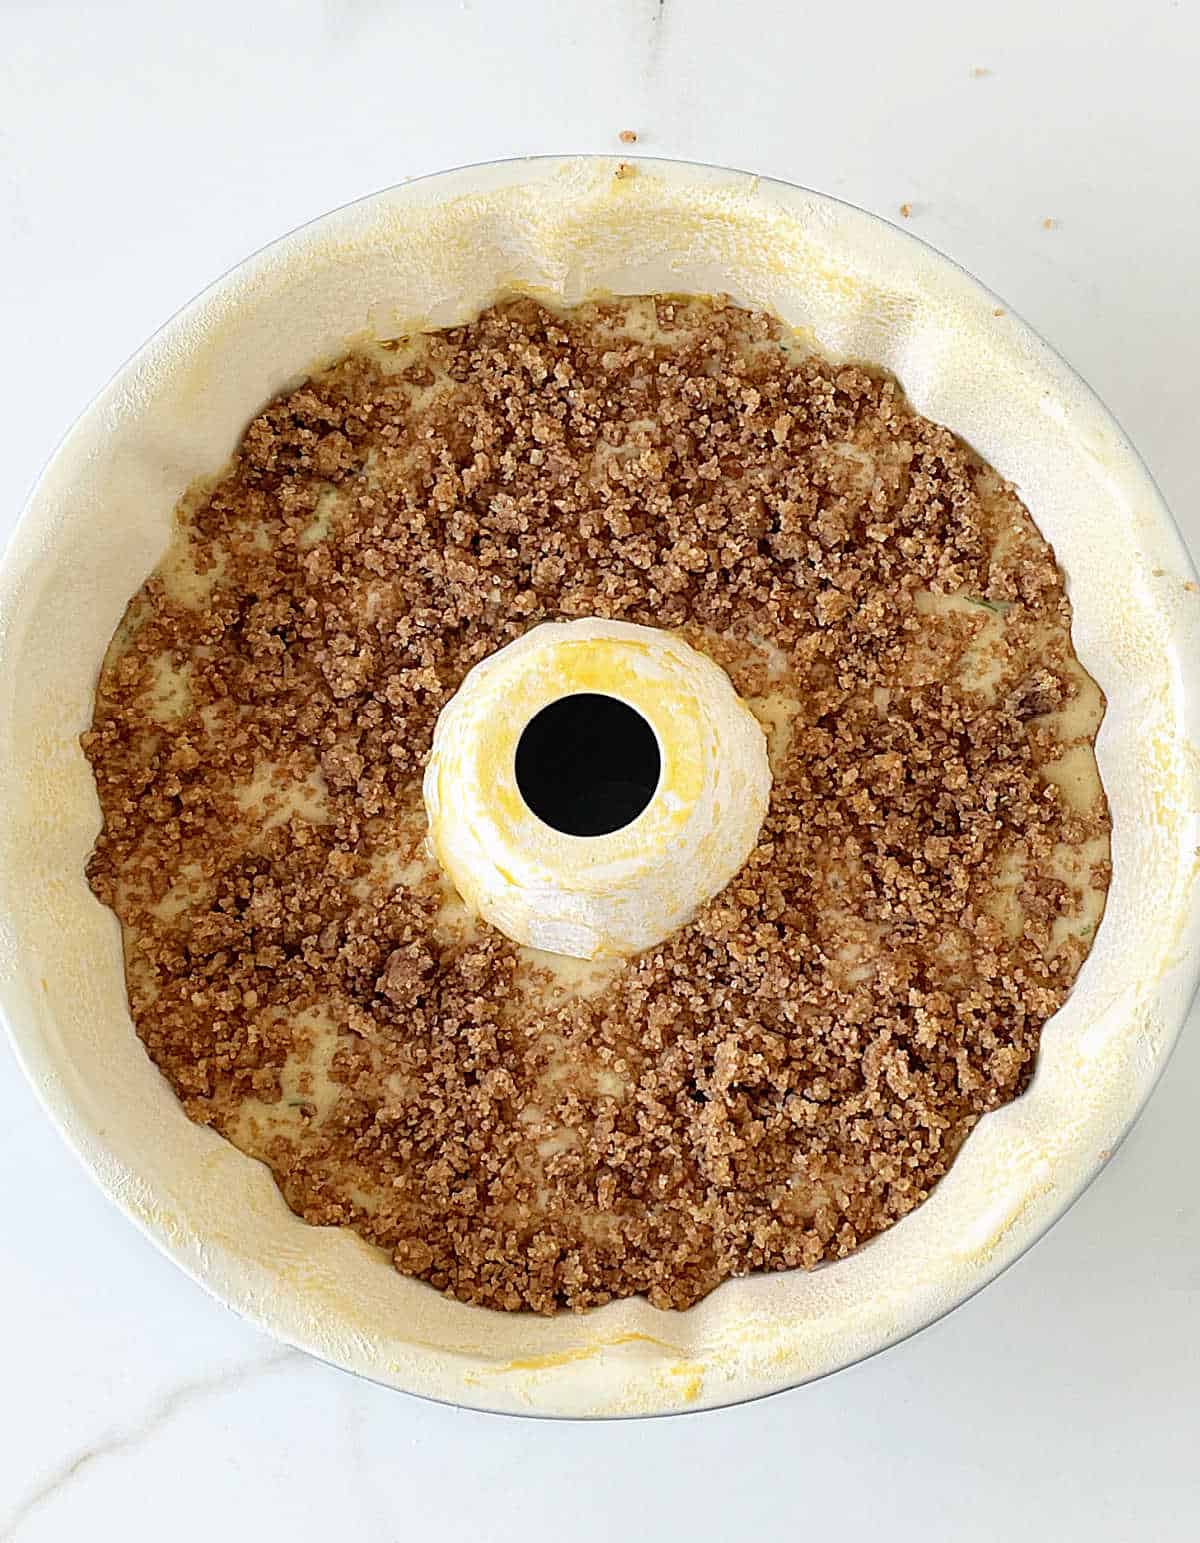 Overview of bundt cake pan with crumble on top on white surface